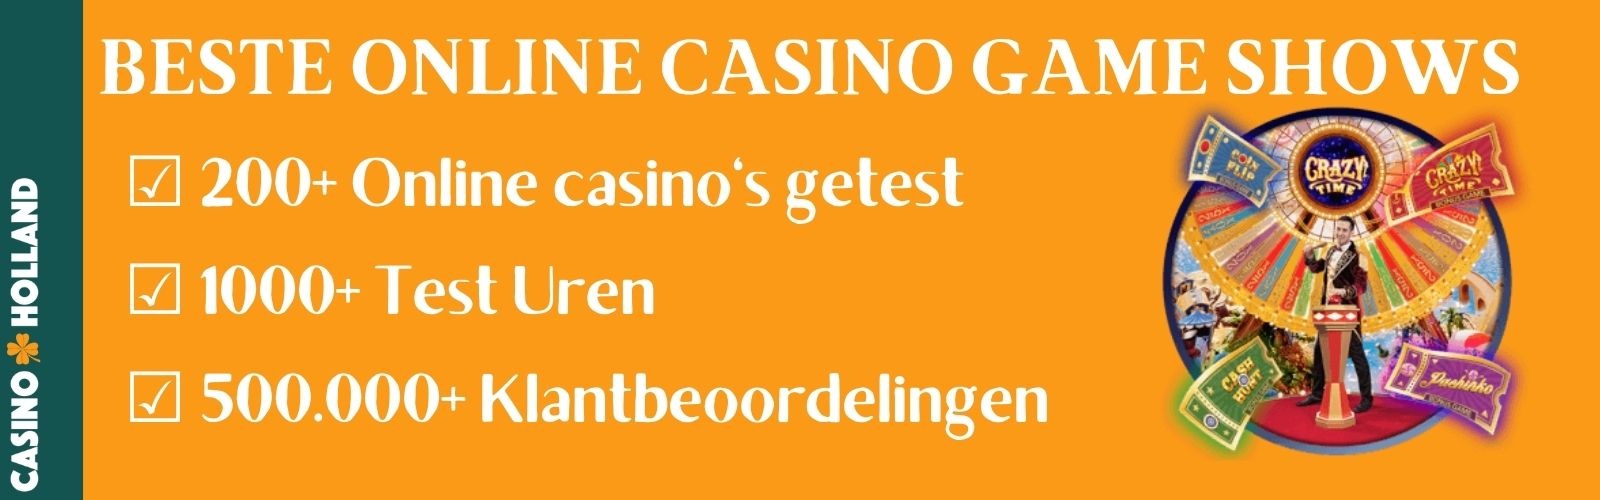 Online Casino Game Shows